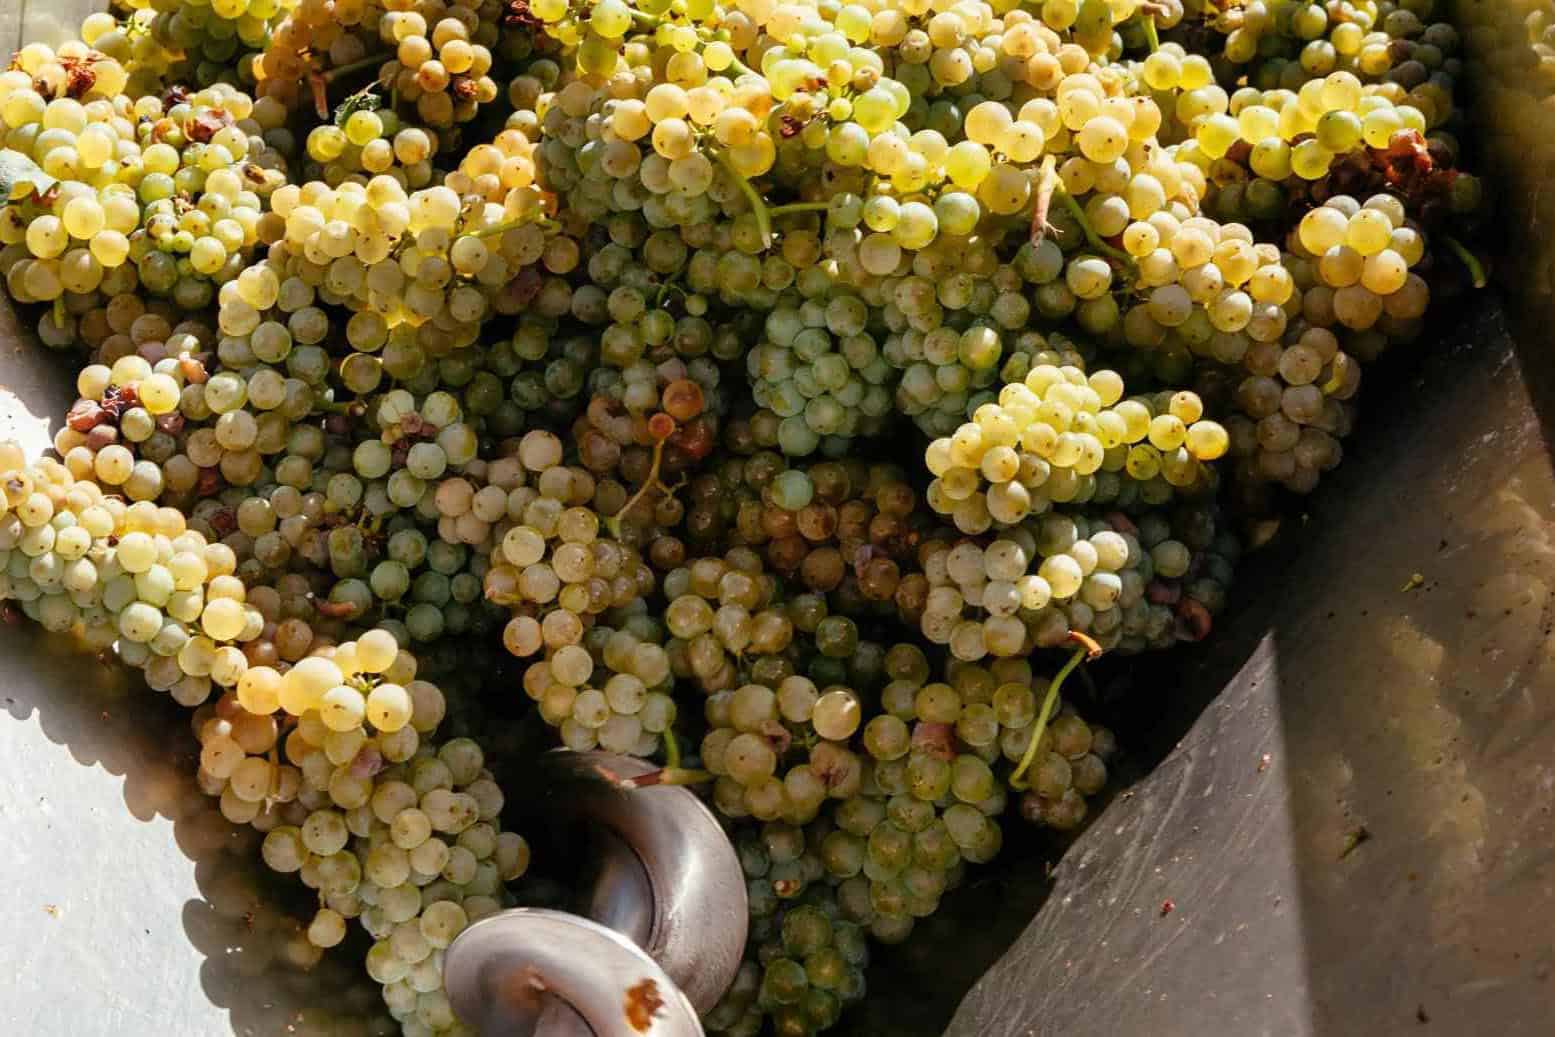 How is the Viognier wine made